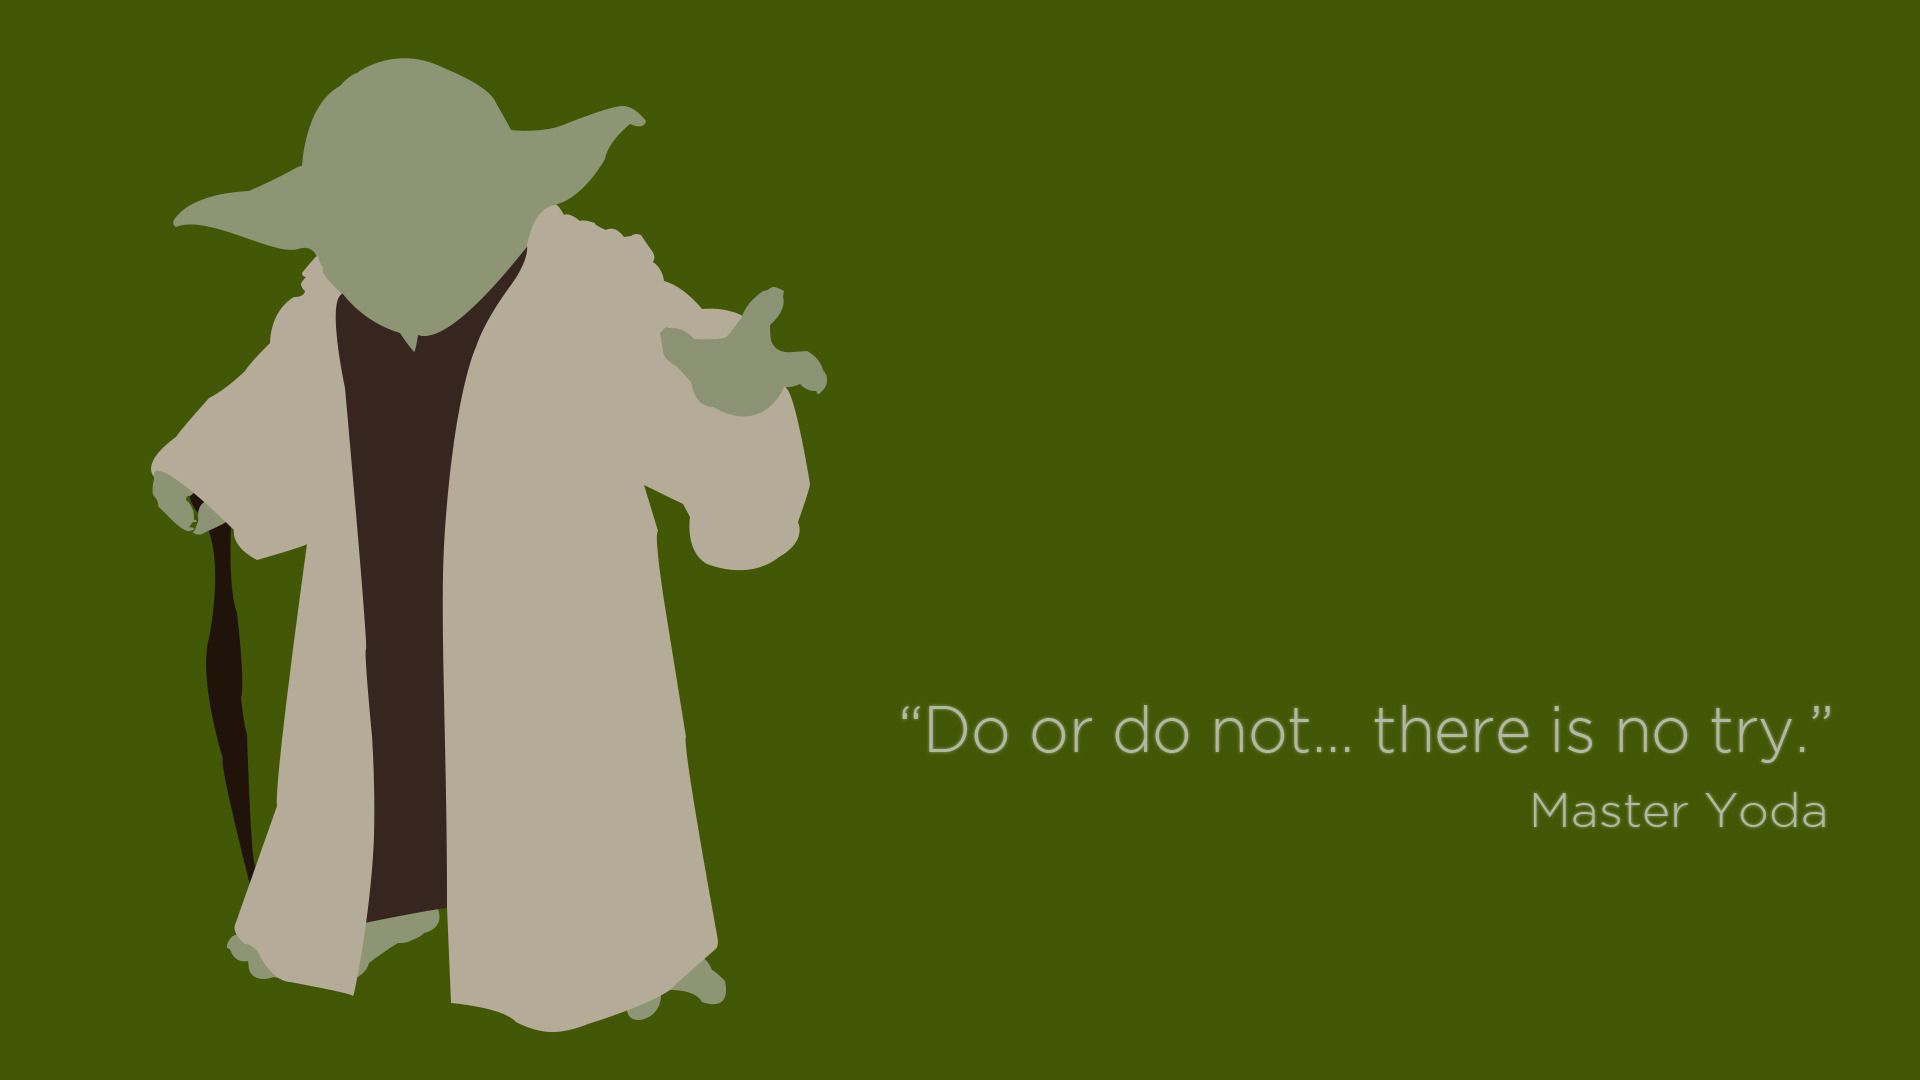 Star Wars Quotes Wallpaper Free Star Wars Quotes Background